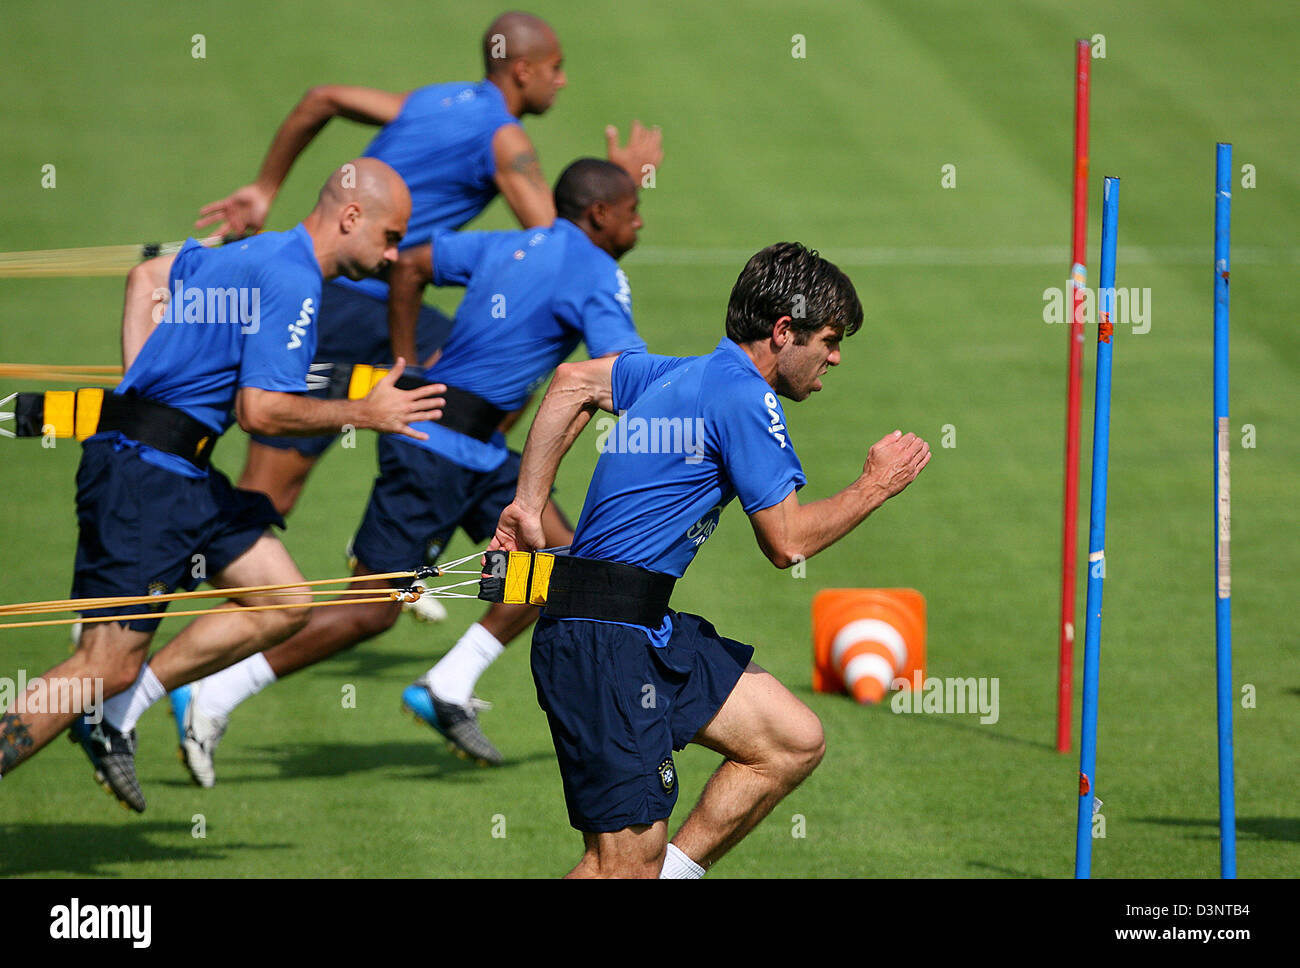 Brazils Juninho Pernambucano (R) and teammates attend a training session in Bergisch Gladbach, Germany, Wednesday 28 June 2006. Brazil will face France in the Quarterfinal of the FIFA World Cup 2006 on Saturday 01 June 2006. Photo: FELIX HEYDER Stock Photo